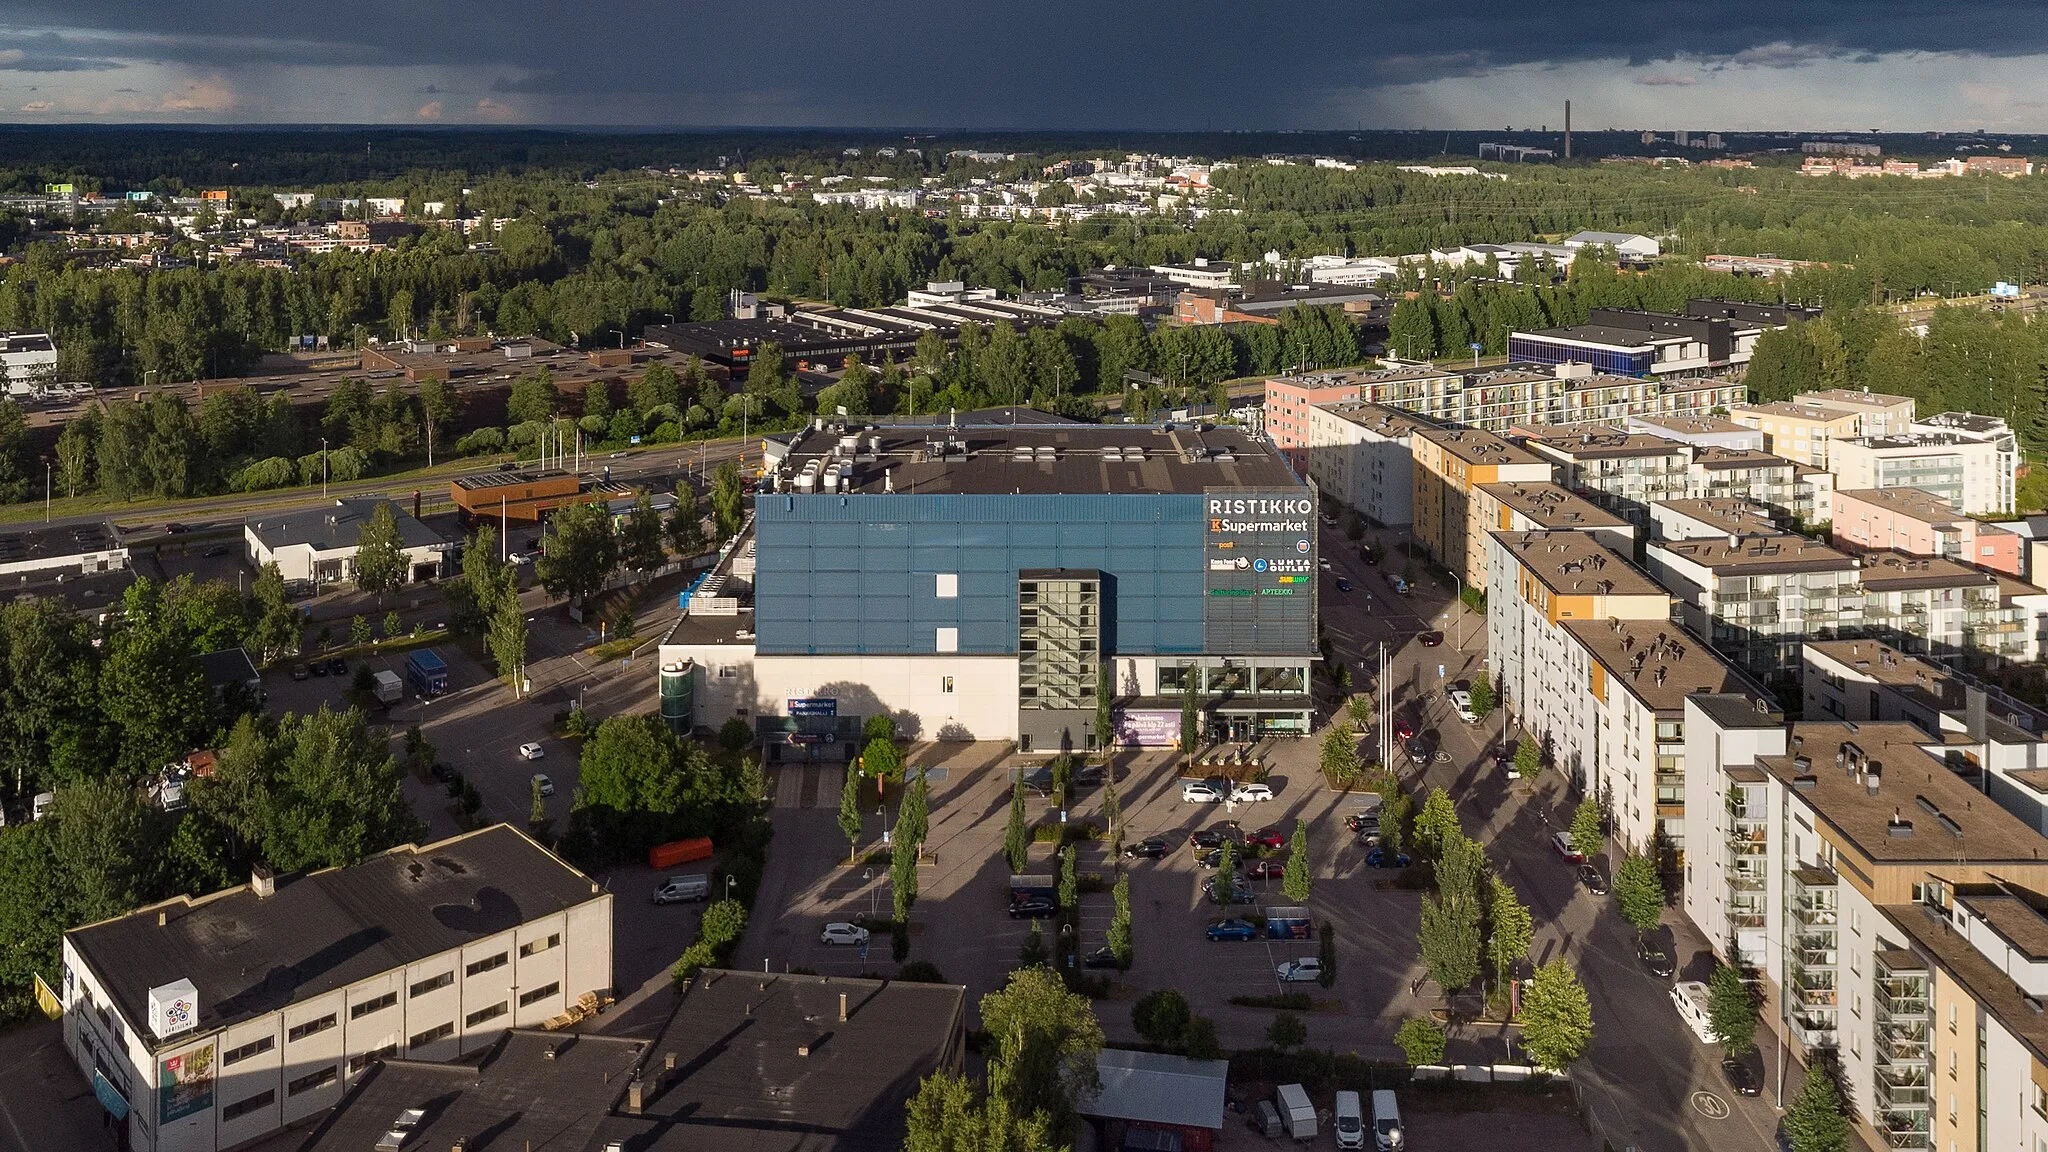 Photo showing: Aerial photograph of Ristikko shopping center in Helsinki, Finland.